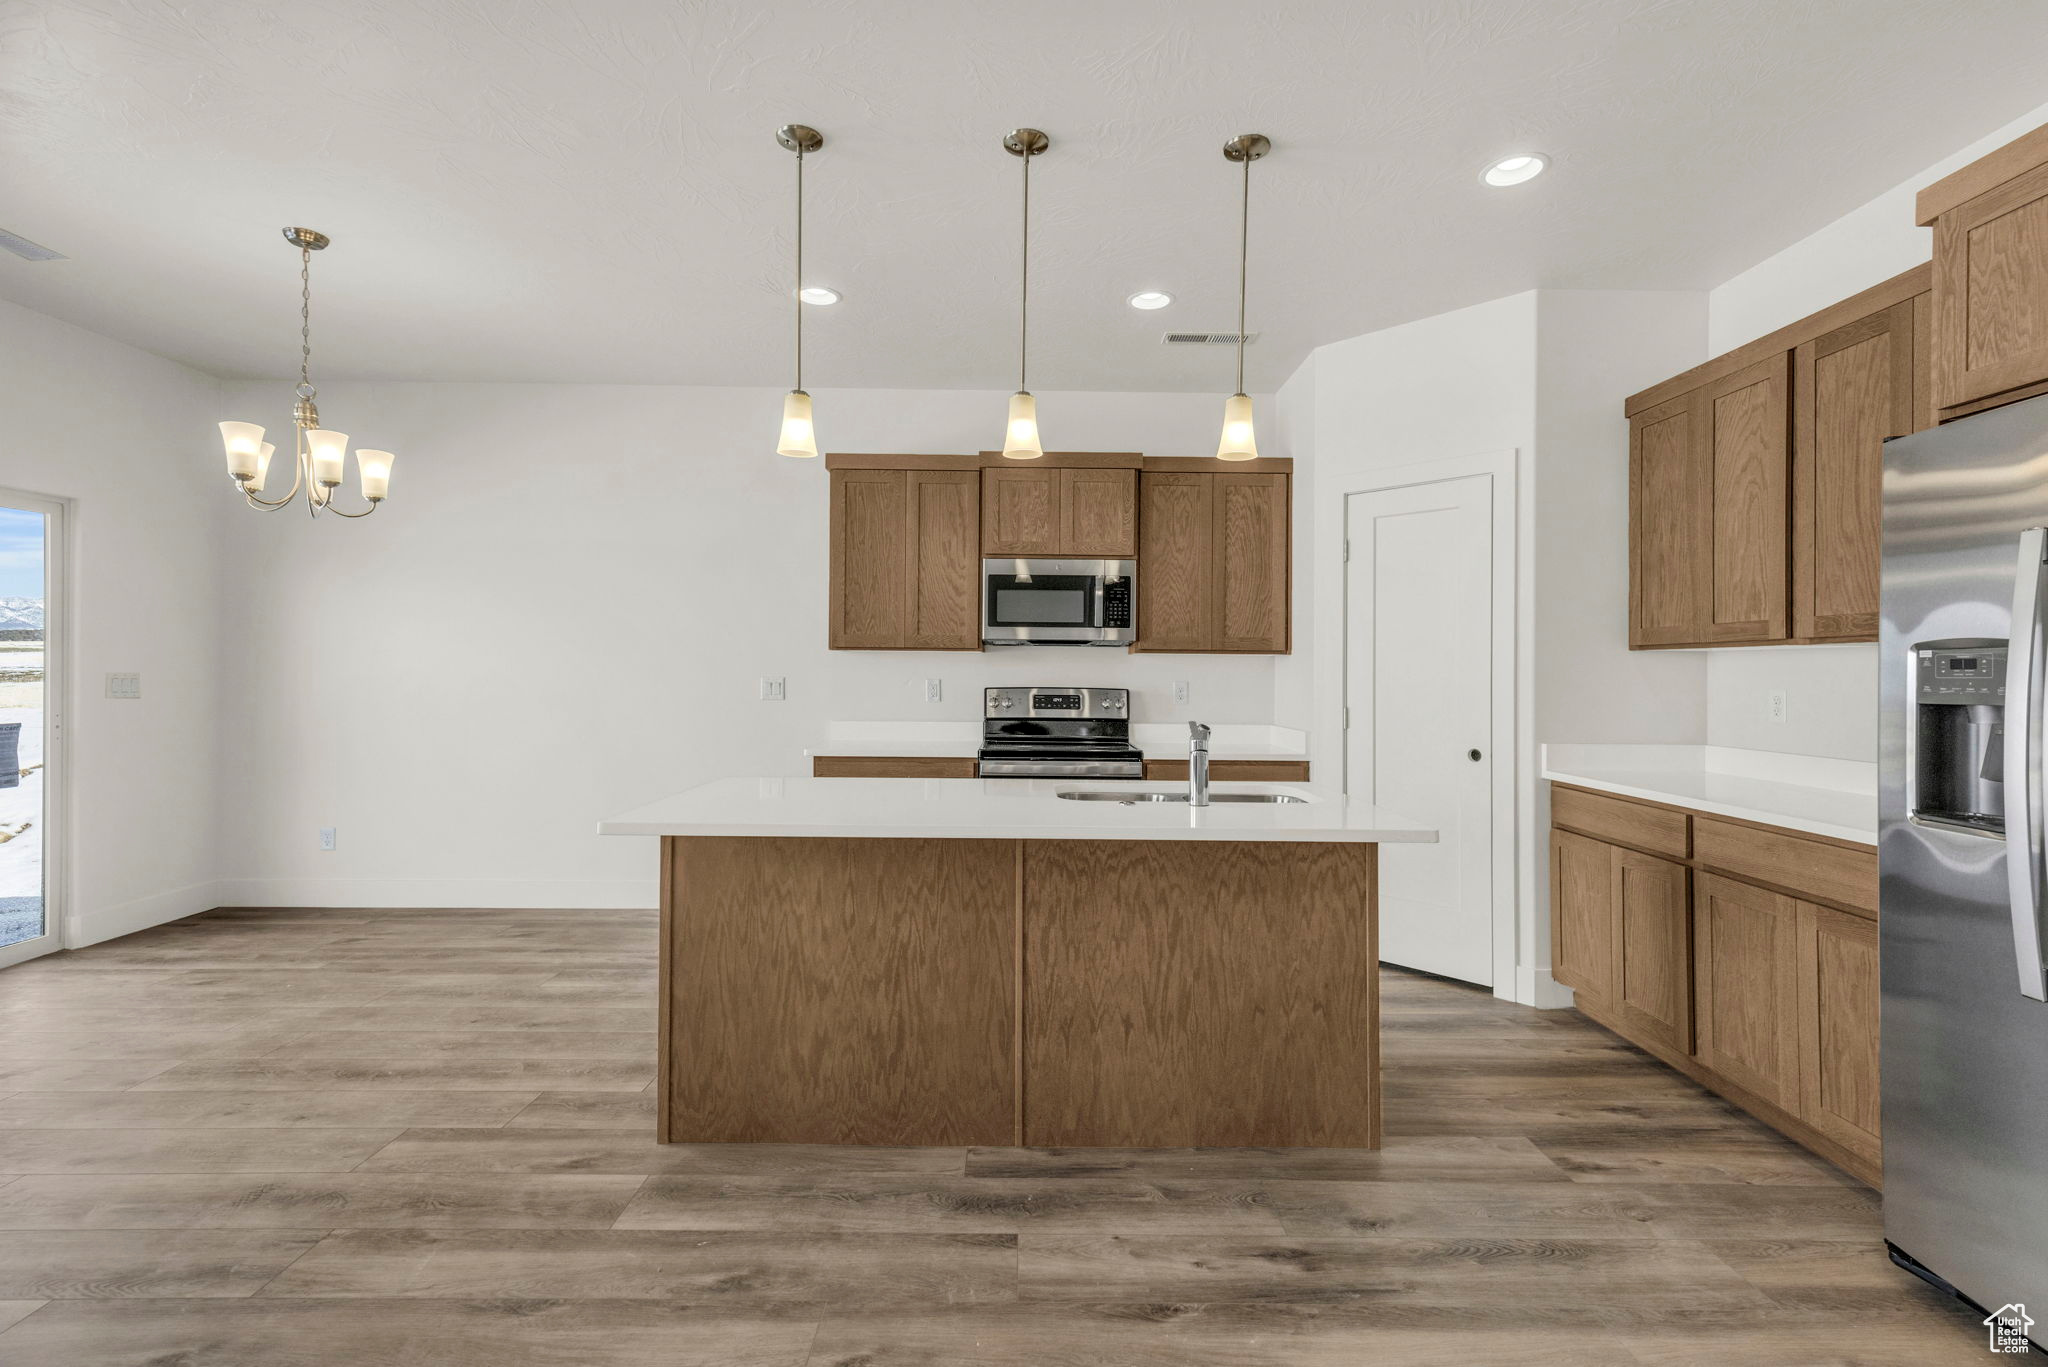 Kitchen with light hardwood / wood-style flooring, a center island with sink, a notable chandelier, stainless steel appliances, and pendant lighting